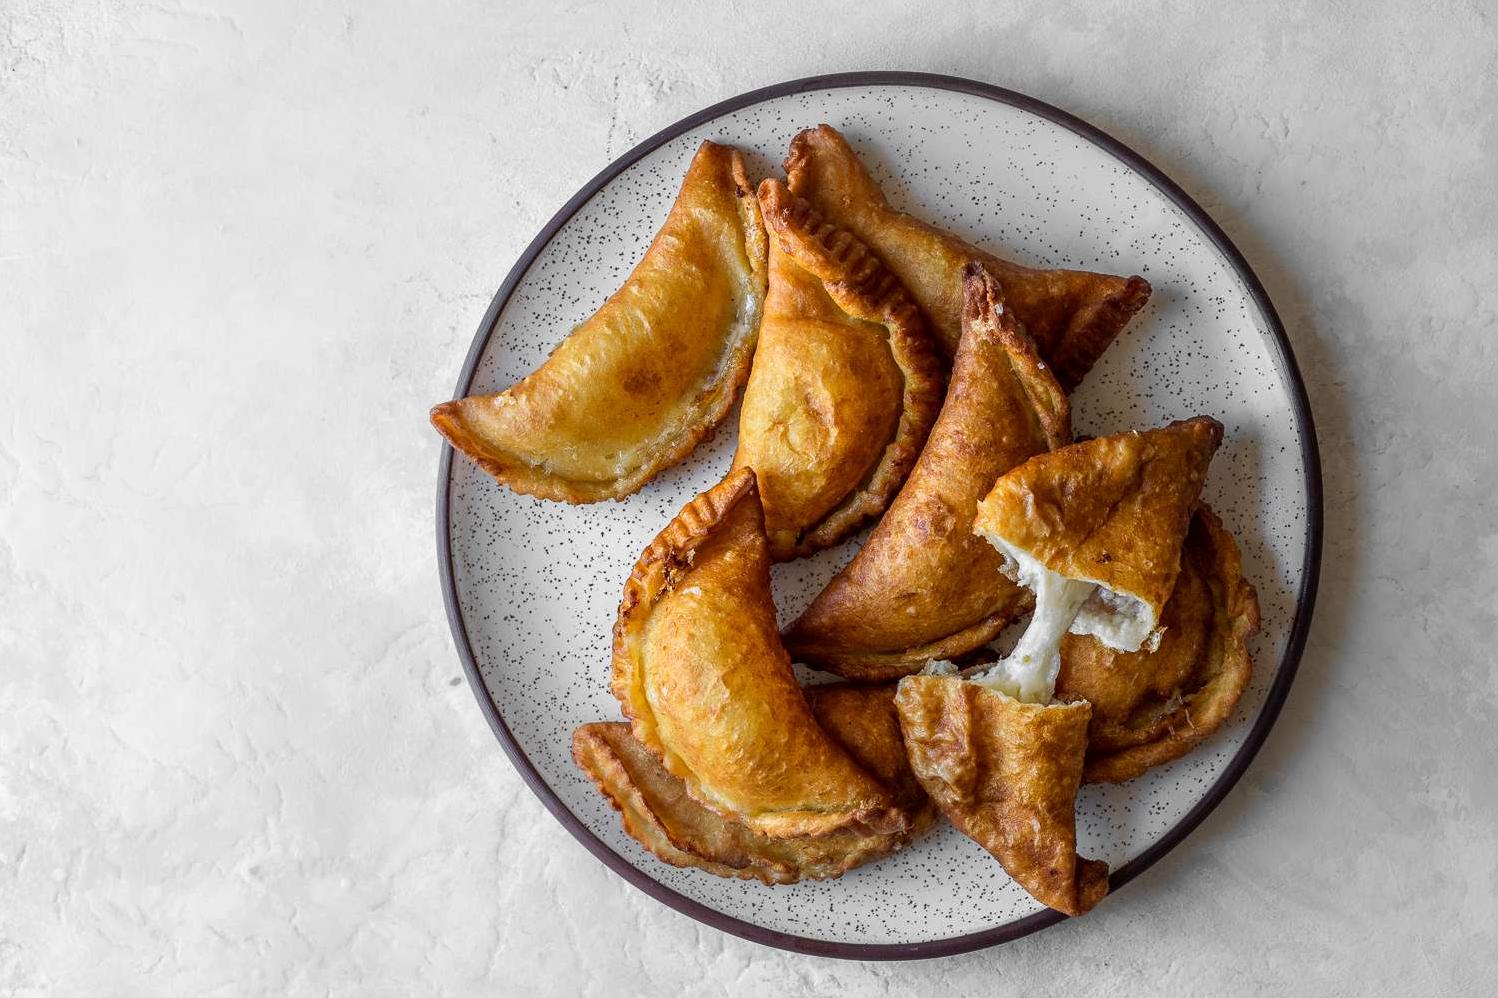  Close your eyes and take a bite of these Empanadas Con Queso, and you'll feel like you're in Latin America!